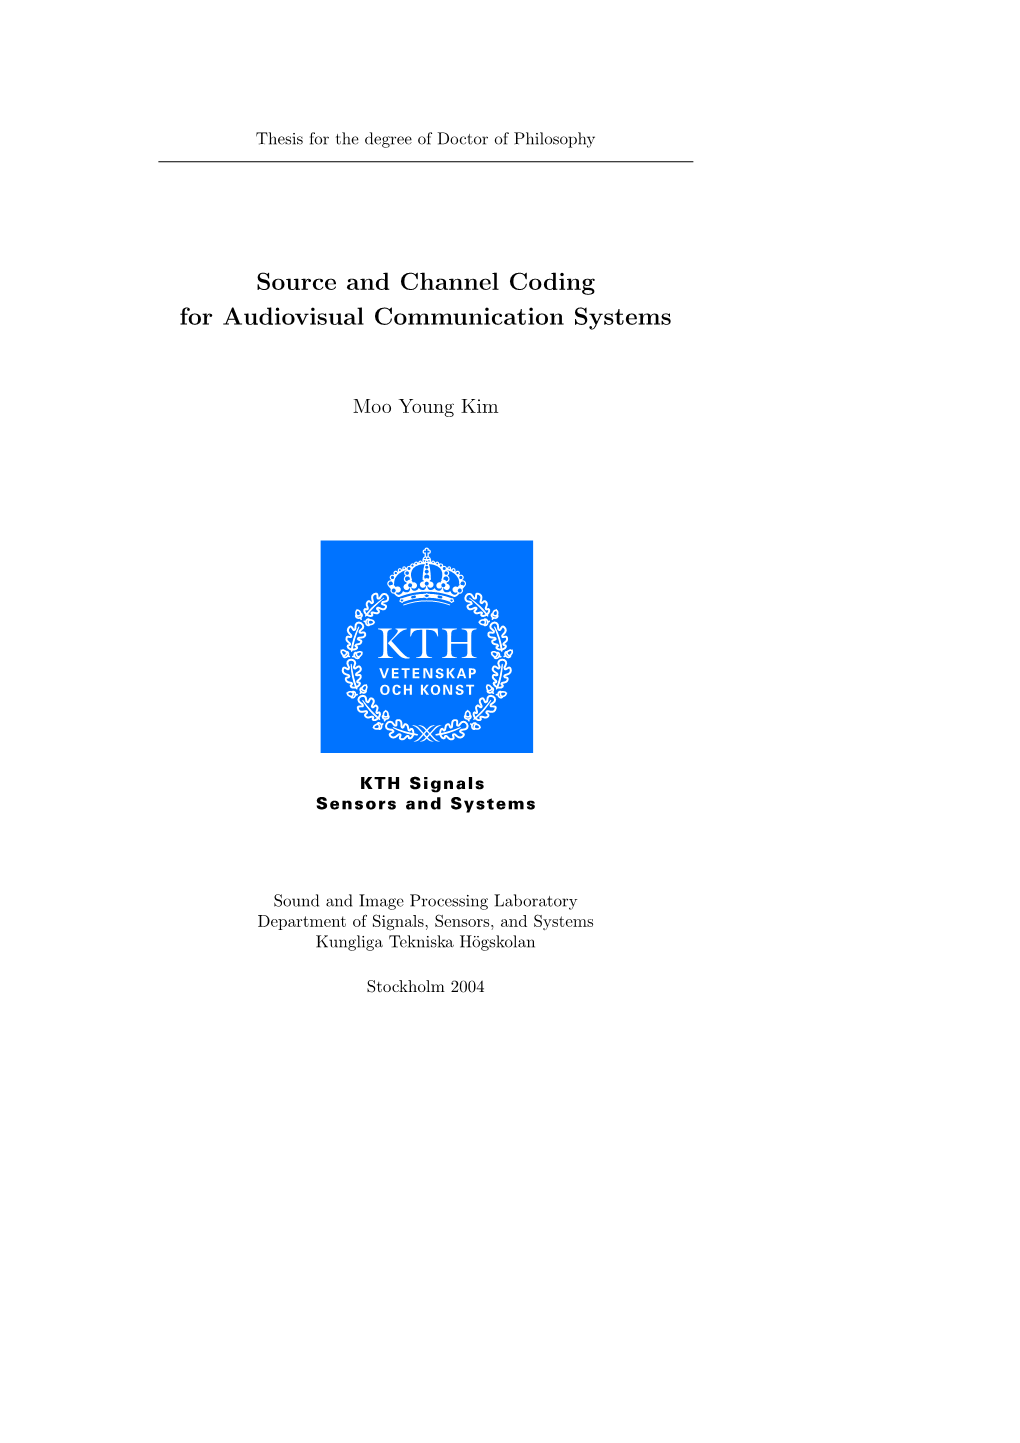 Source and Channel Coding for Audiovisual Communication Systems